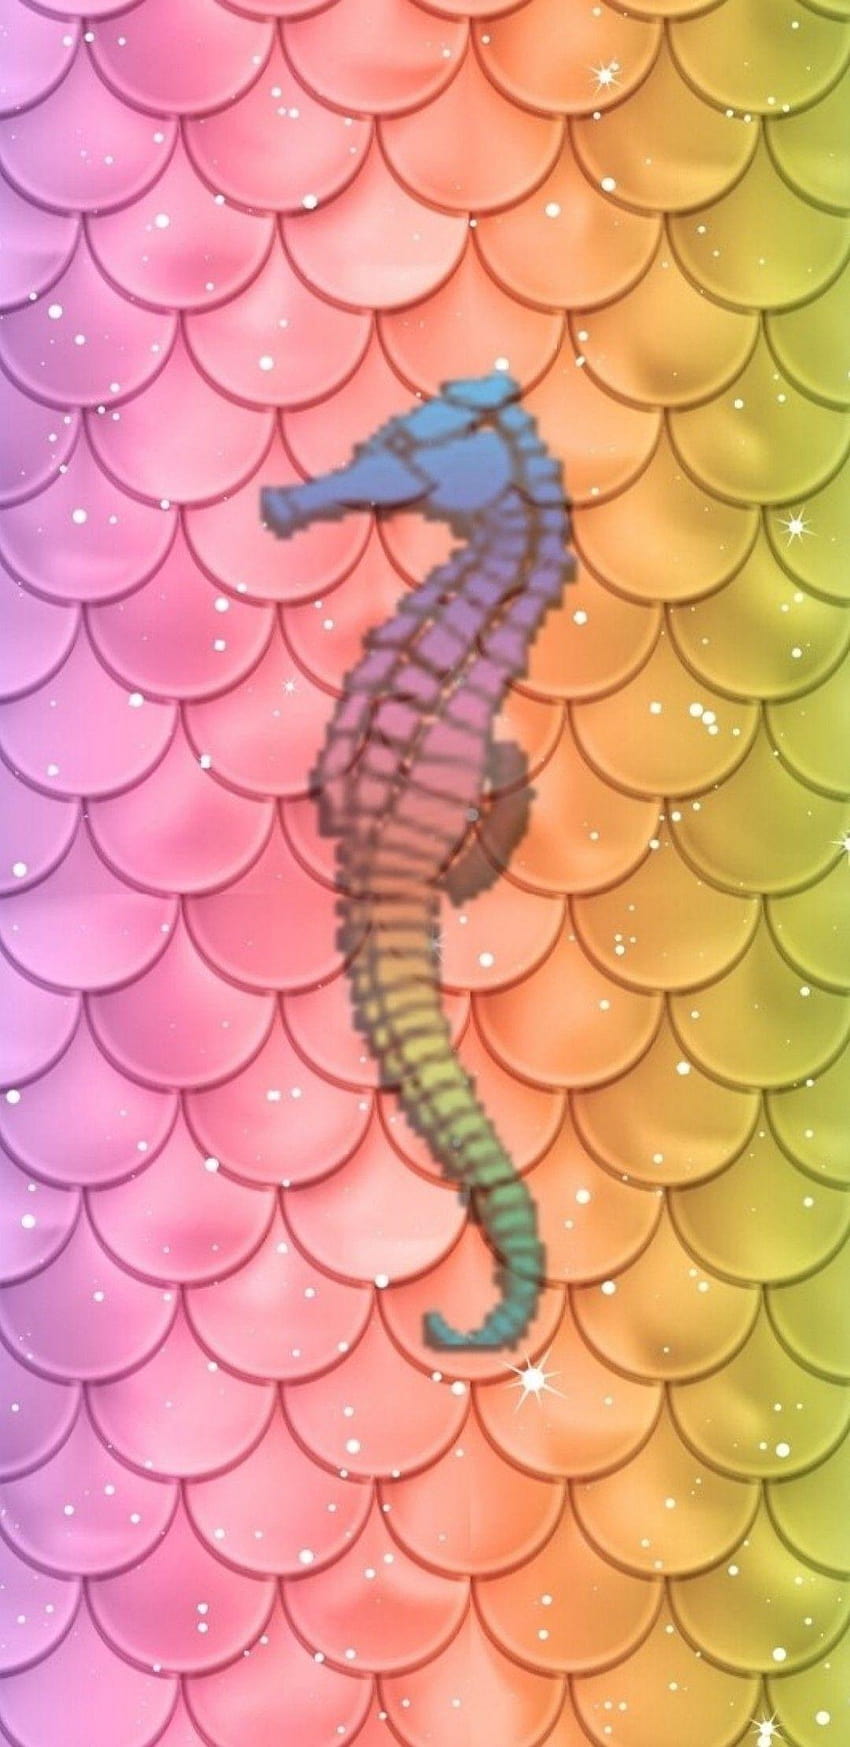 Fenedhis Lasa♡ On Patterns In 2019 Mermaid And Seahorse Hd Phone